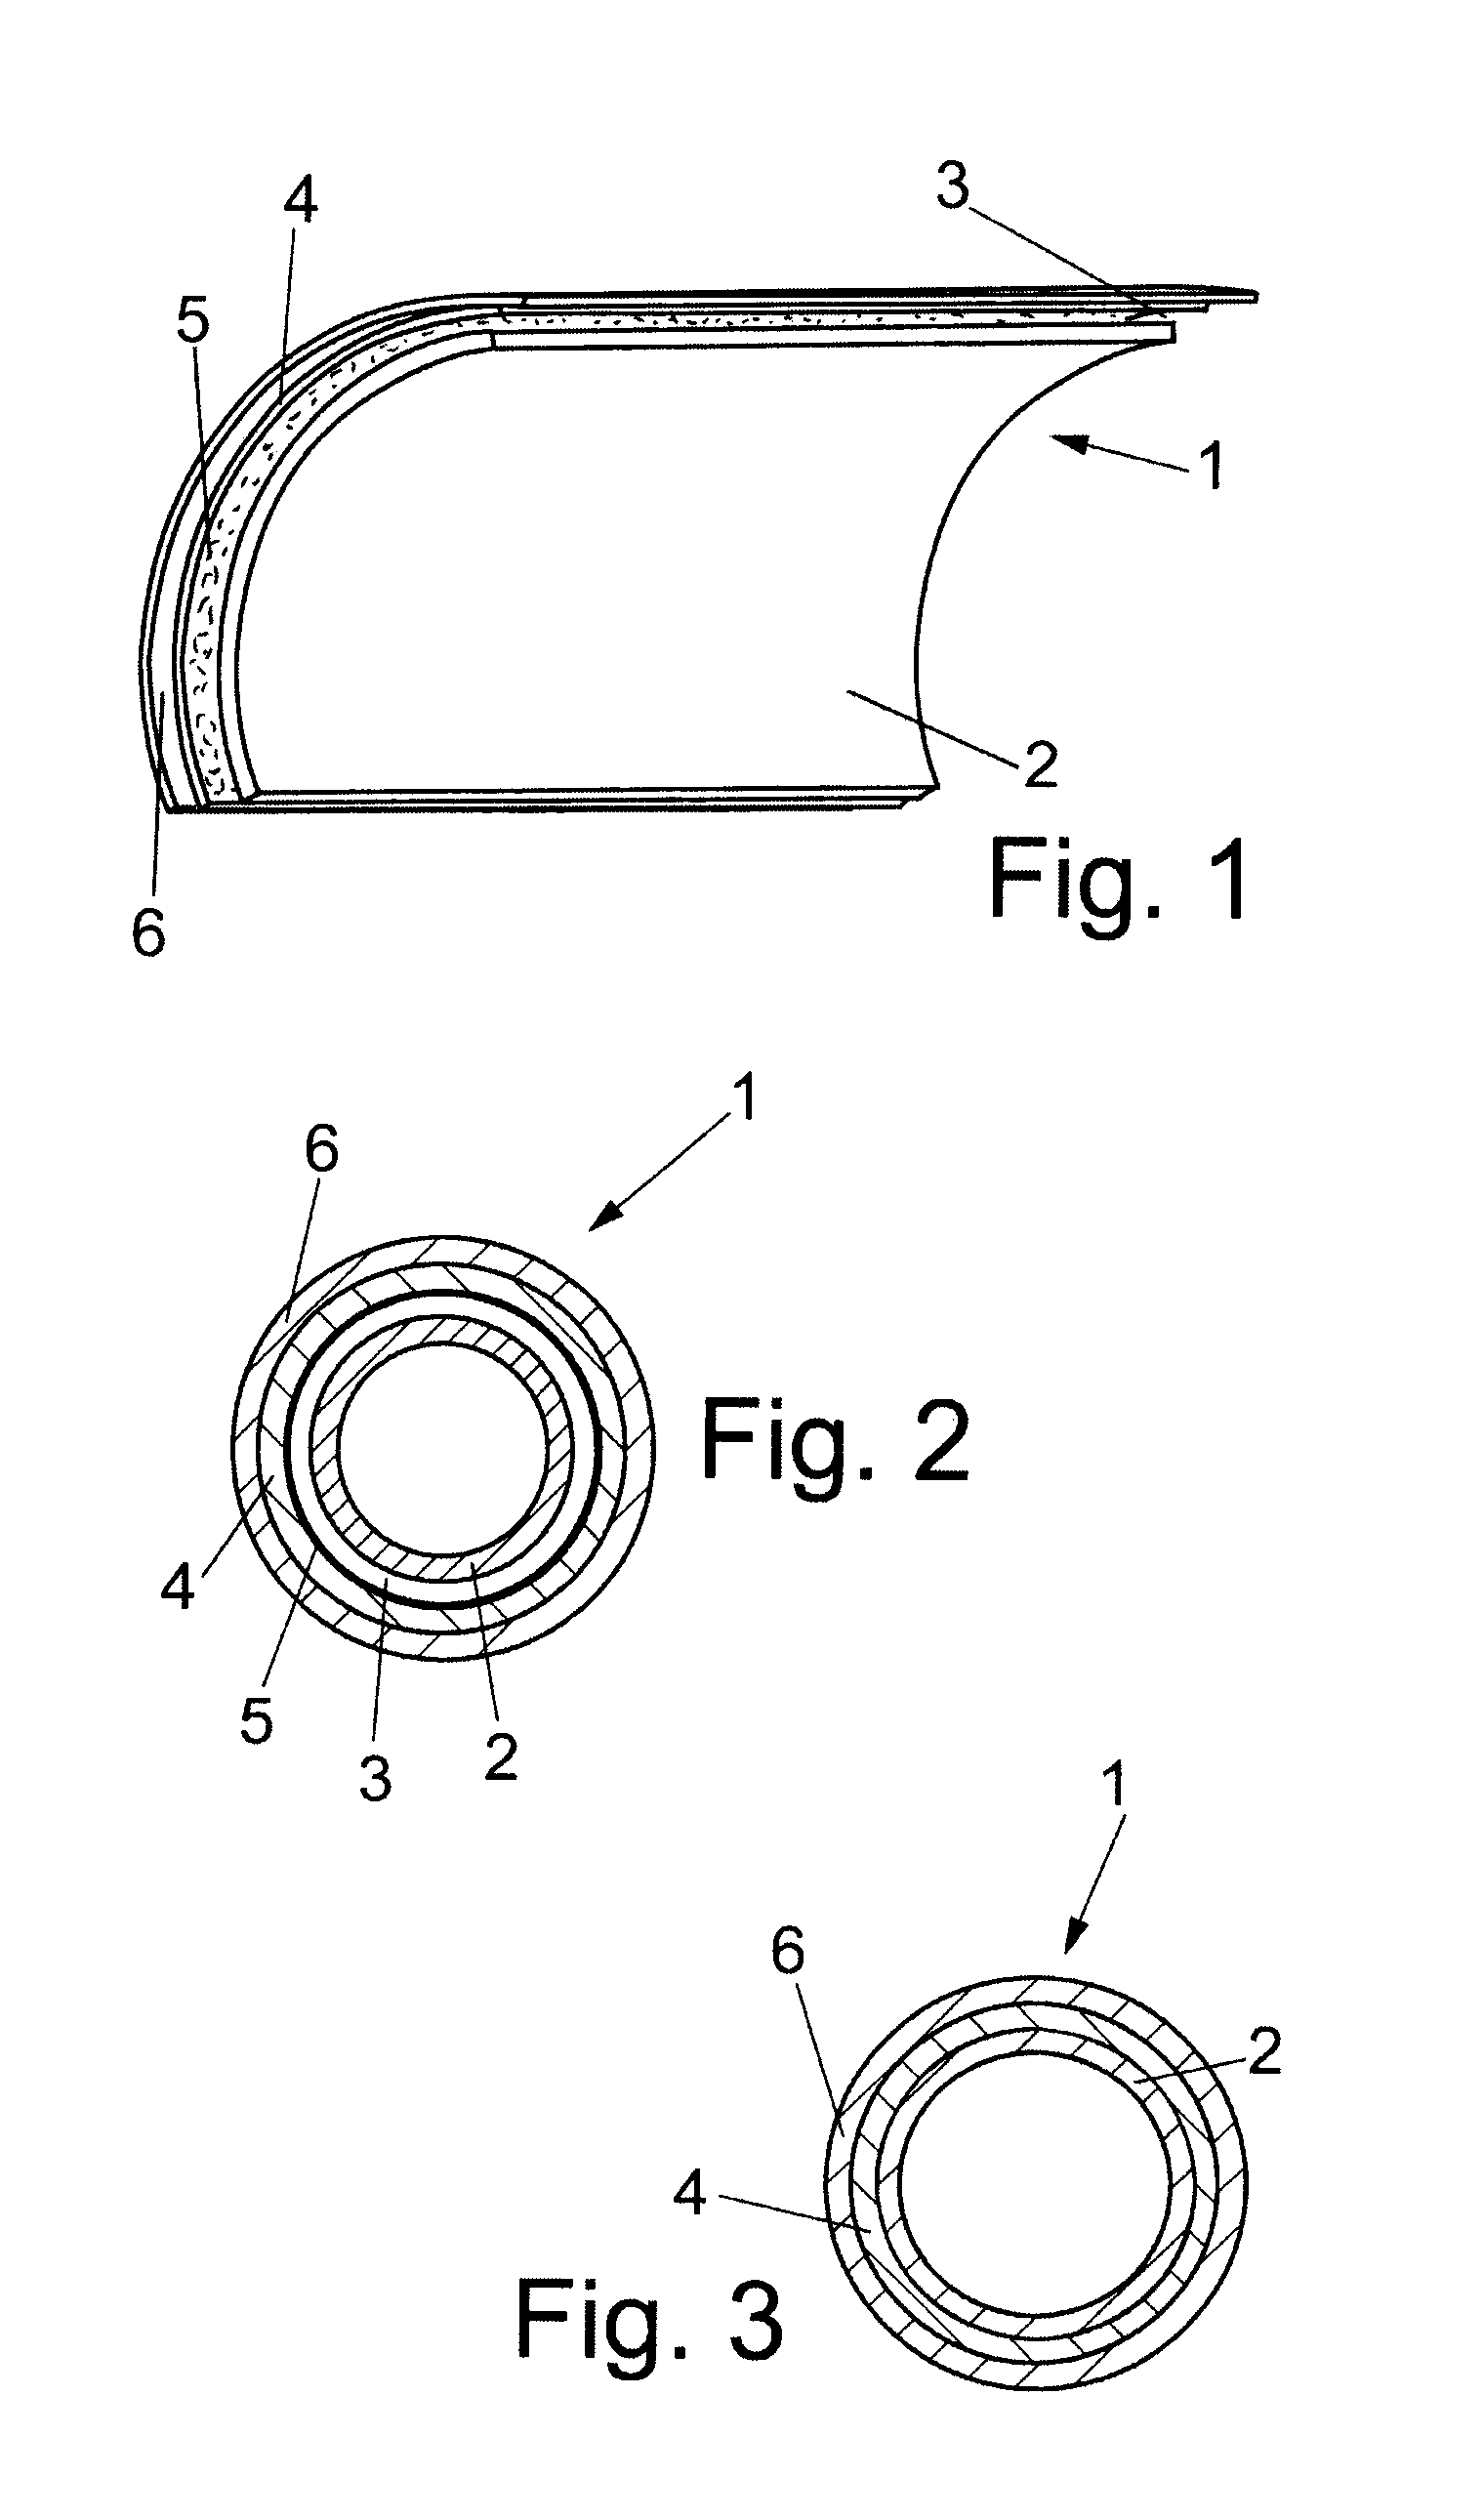 Apparatus for generating electrical power from the waste heat of an internal combustion engine